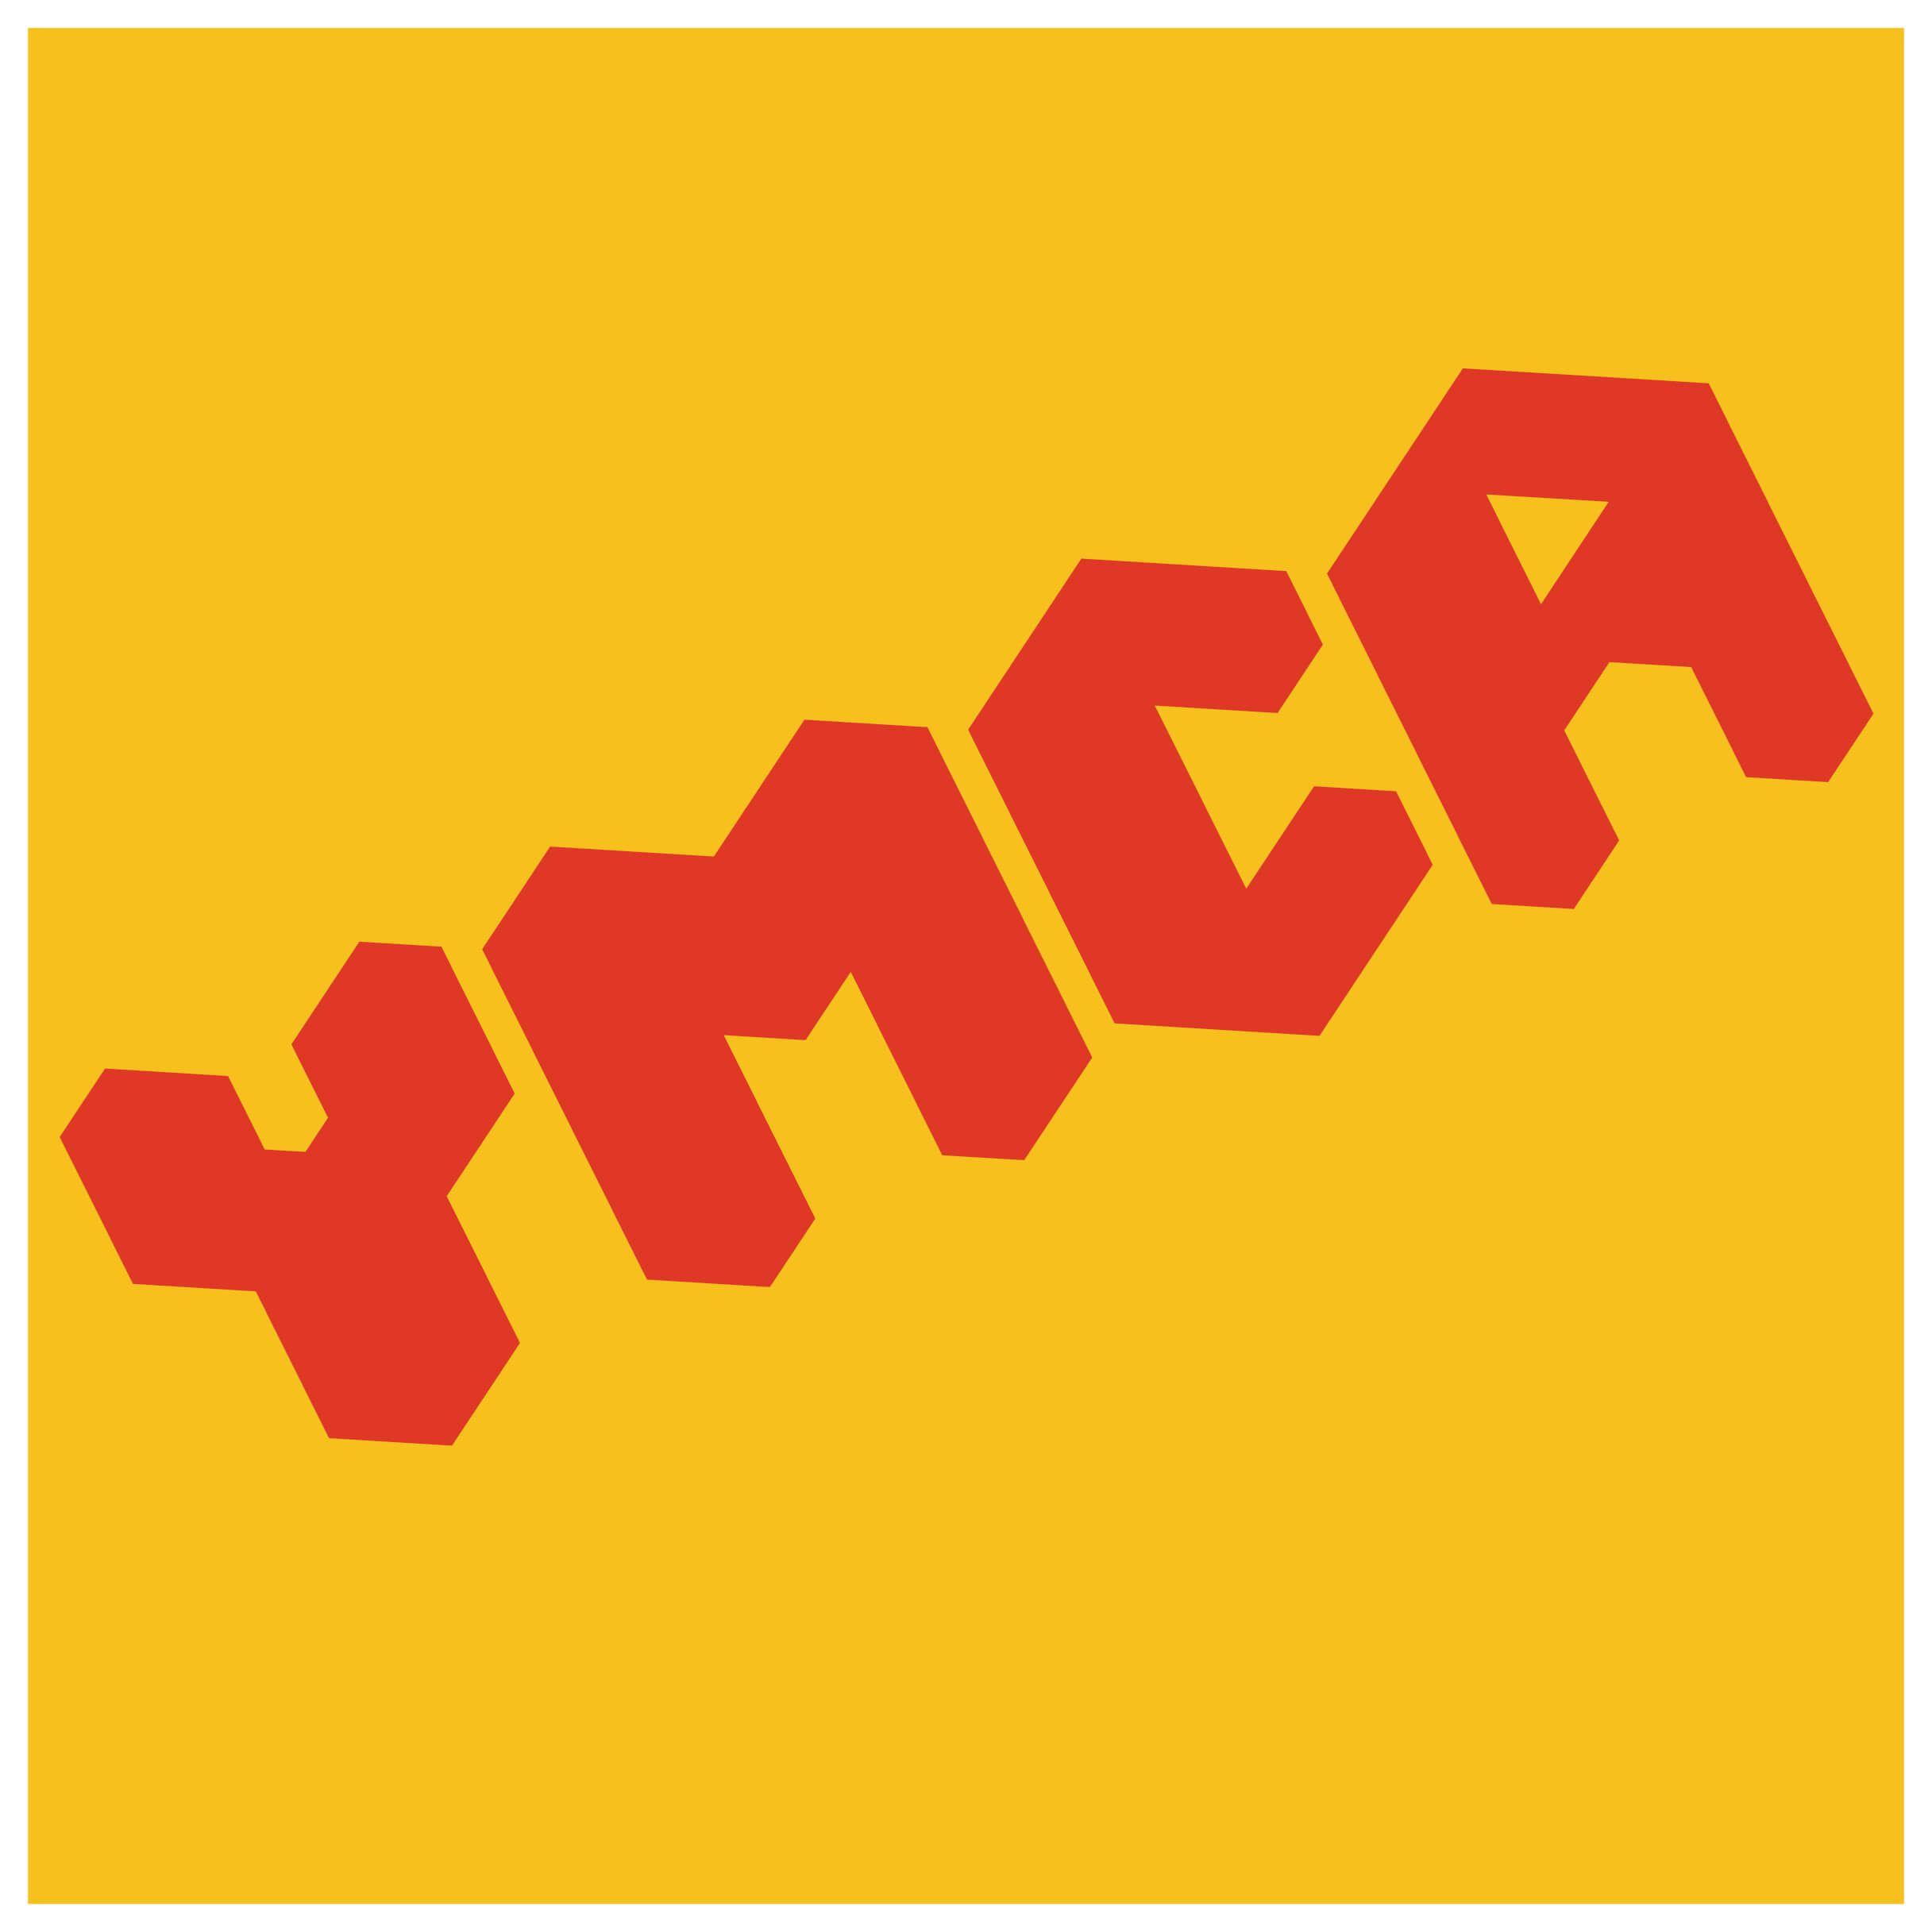 Purple and Red YMCA Logo - YMCA Swansea - Heart of the Community